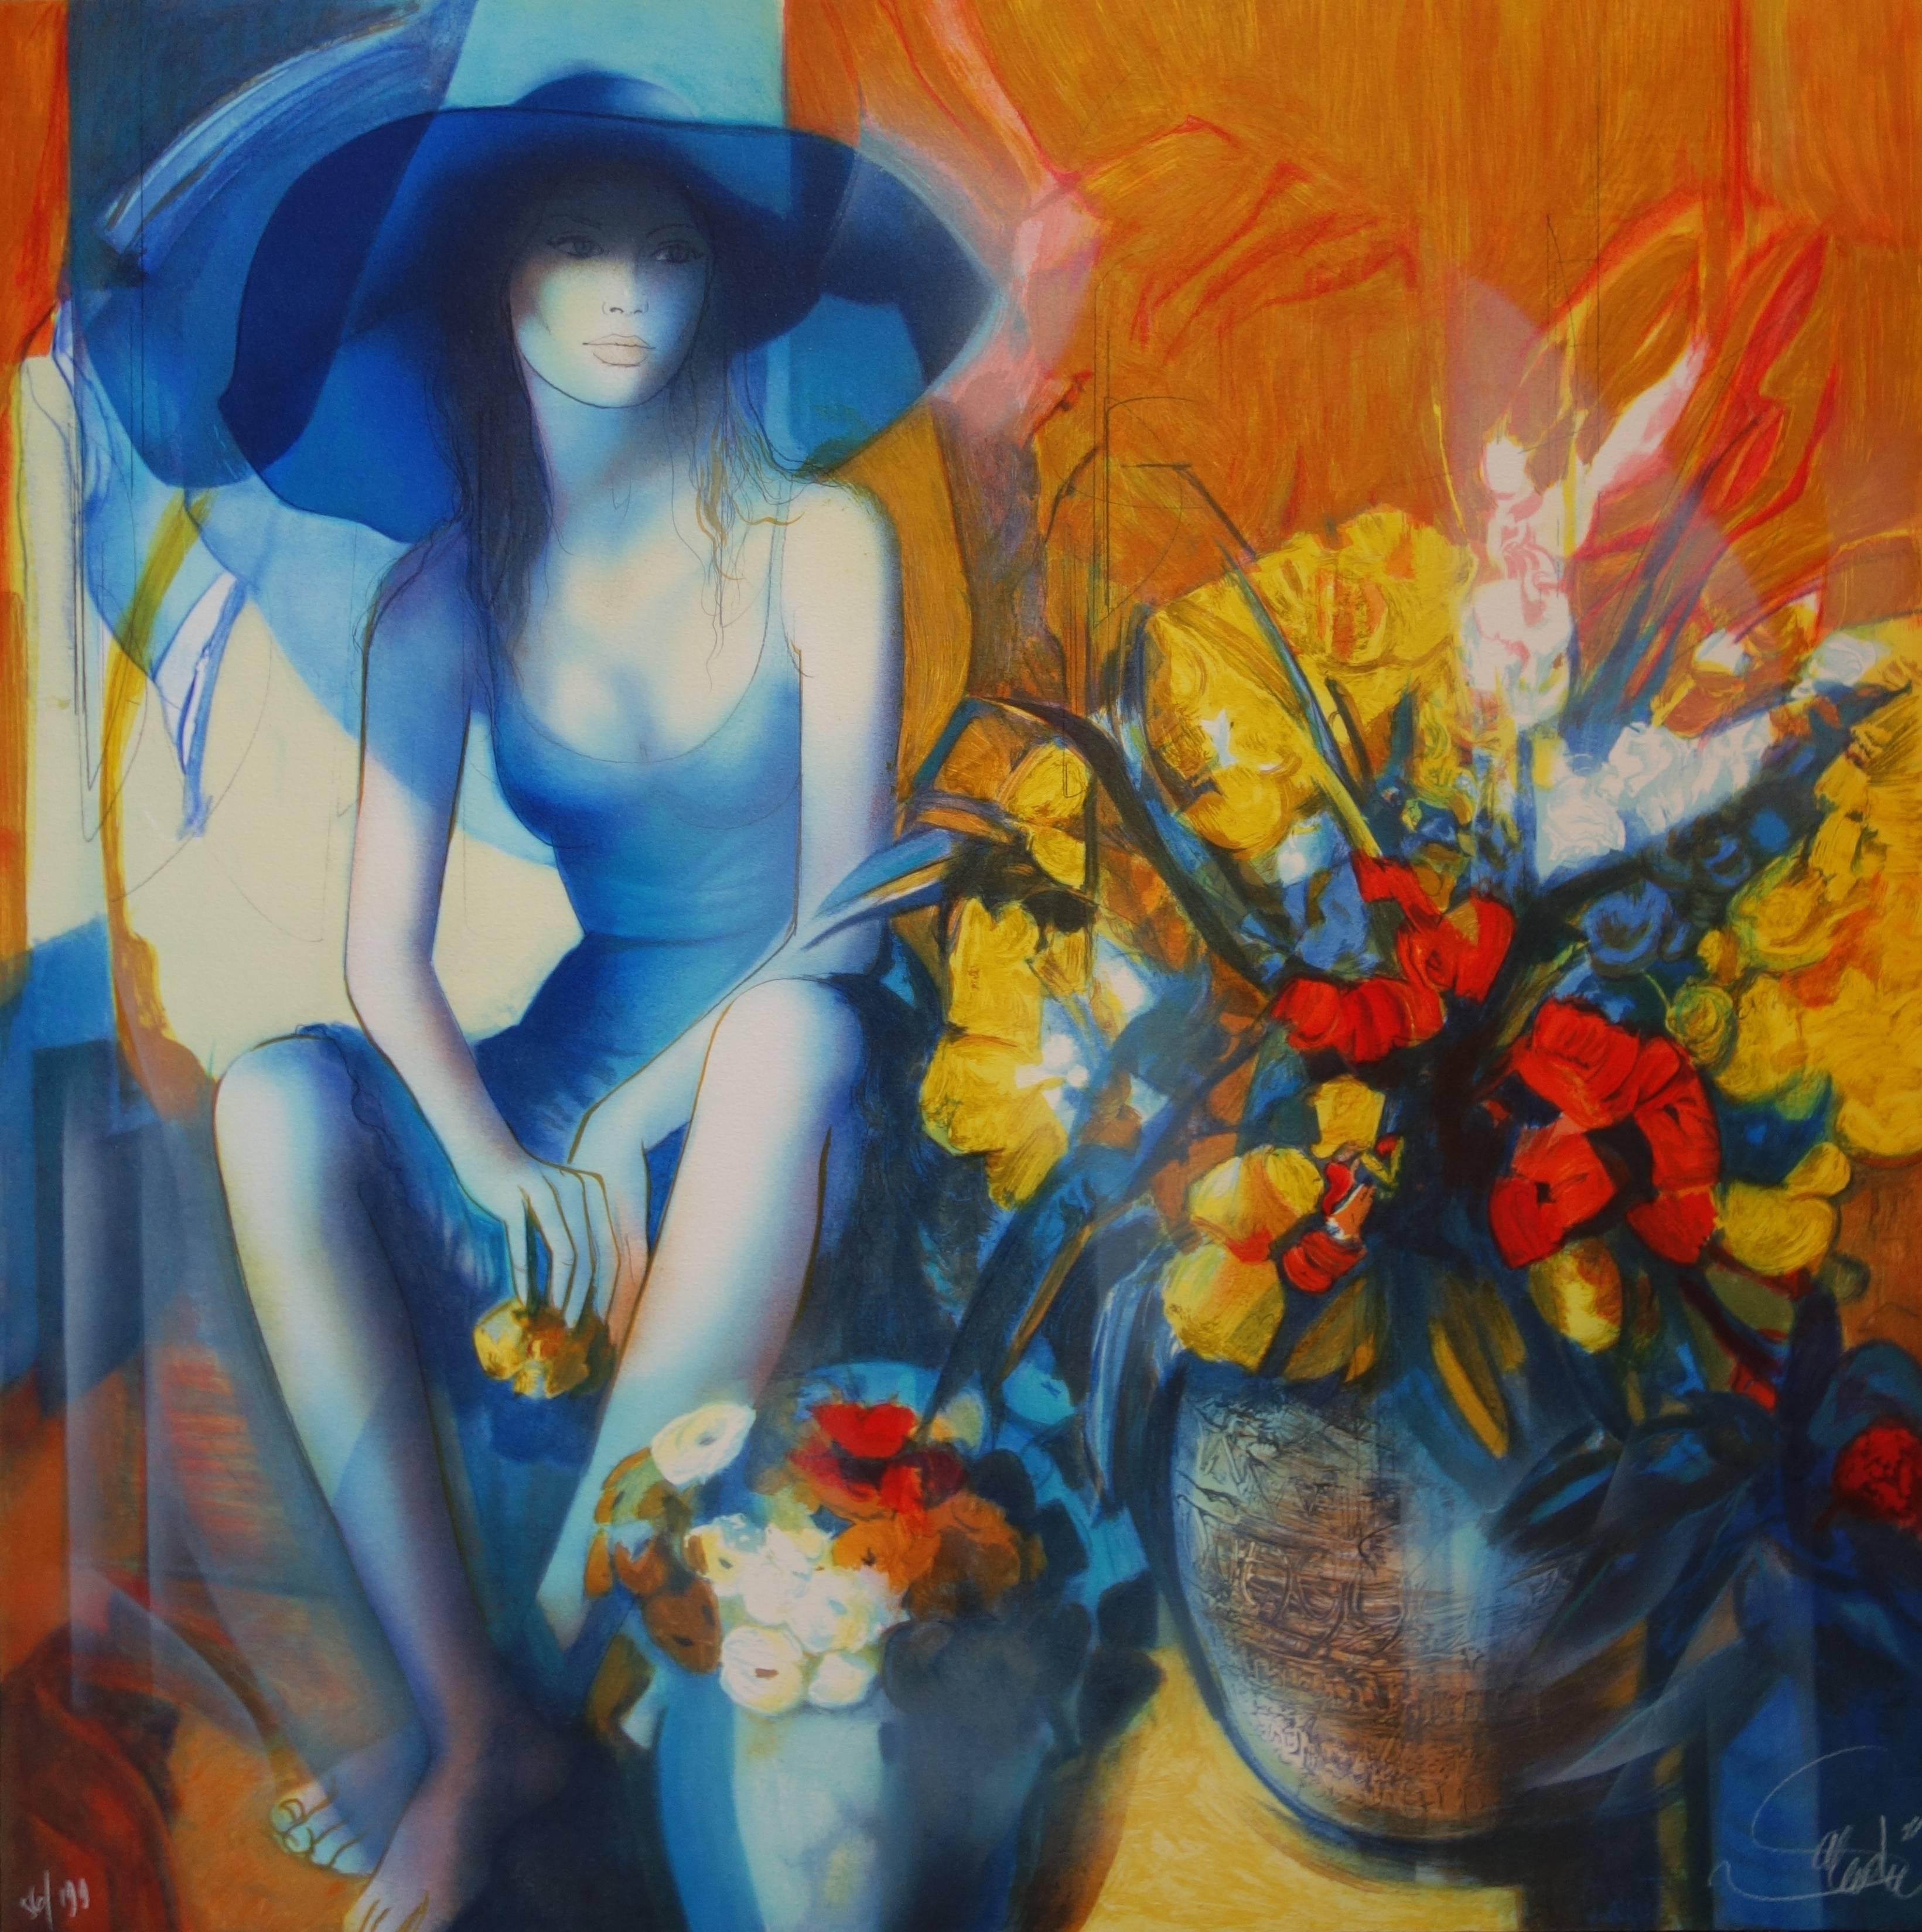 Jean-Baptiste Valadie Figurative Print - Manon with Flowers - Original handsigned lithograph - 199ex